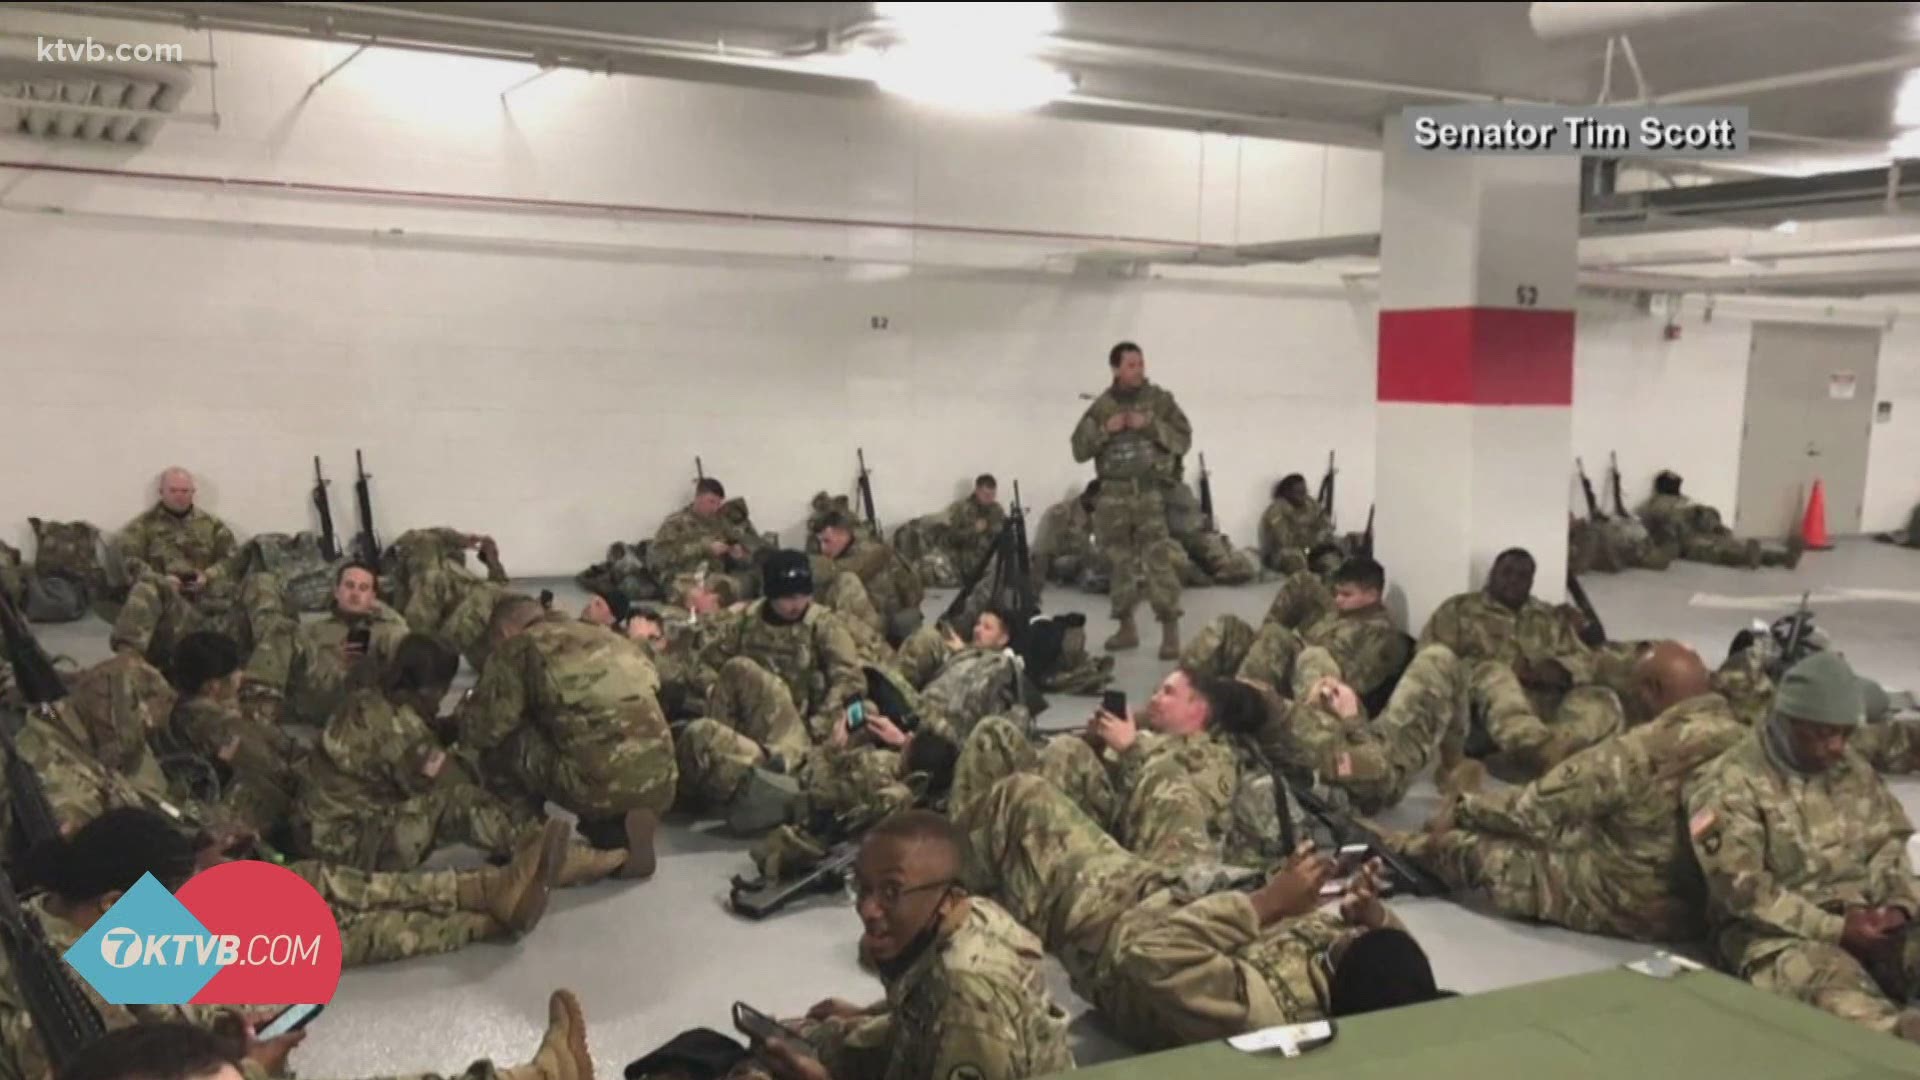 Members of the Idaho National Guard are back home after a 9-day trip to our nation's capital. There was some noise made on social media about the conditions in D.C.